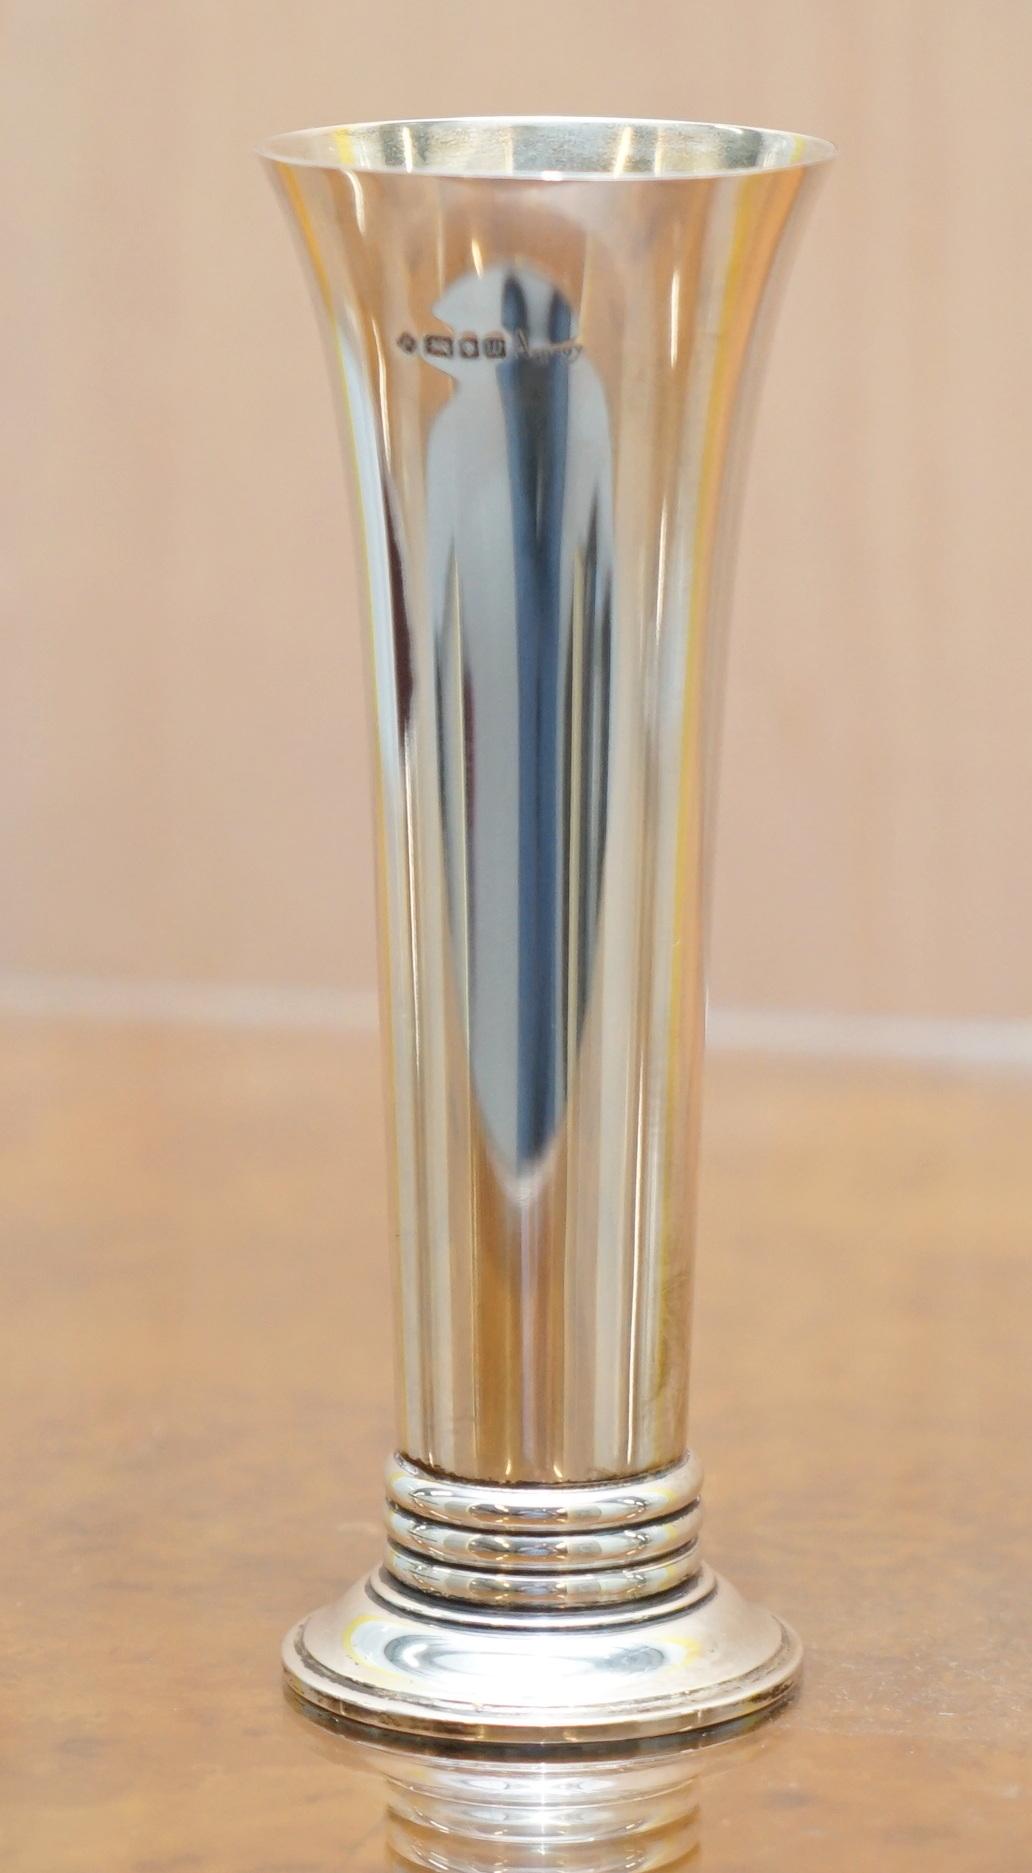 We are delighted to offer for sale this stunning and original Asprey London fully hallmarked sterling silver poppy flower vase 

A very good looking and decorative piece, imagine it with a single tall flower on a lovely side table, absolutely